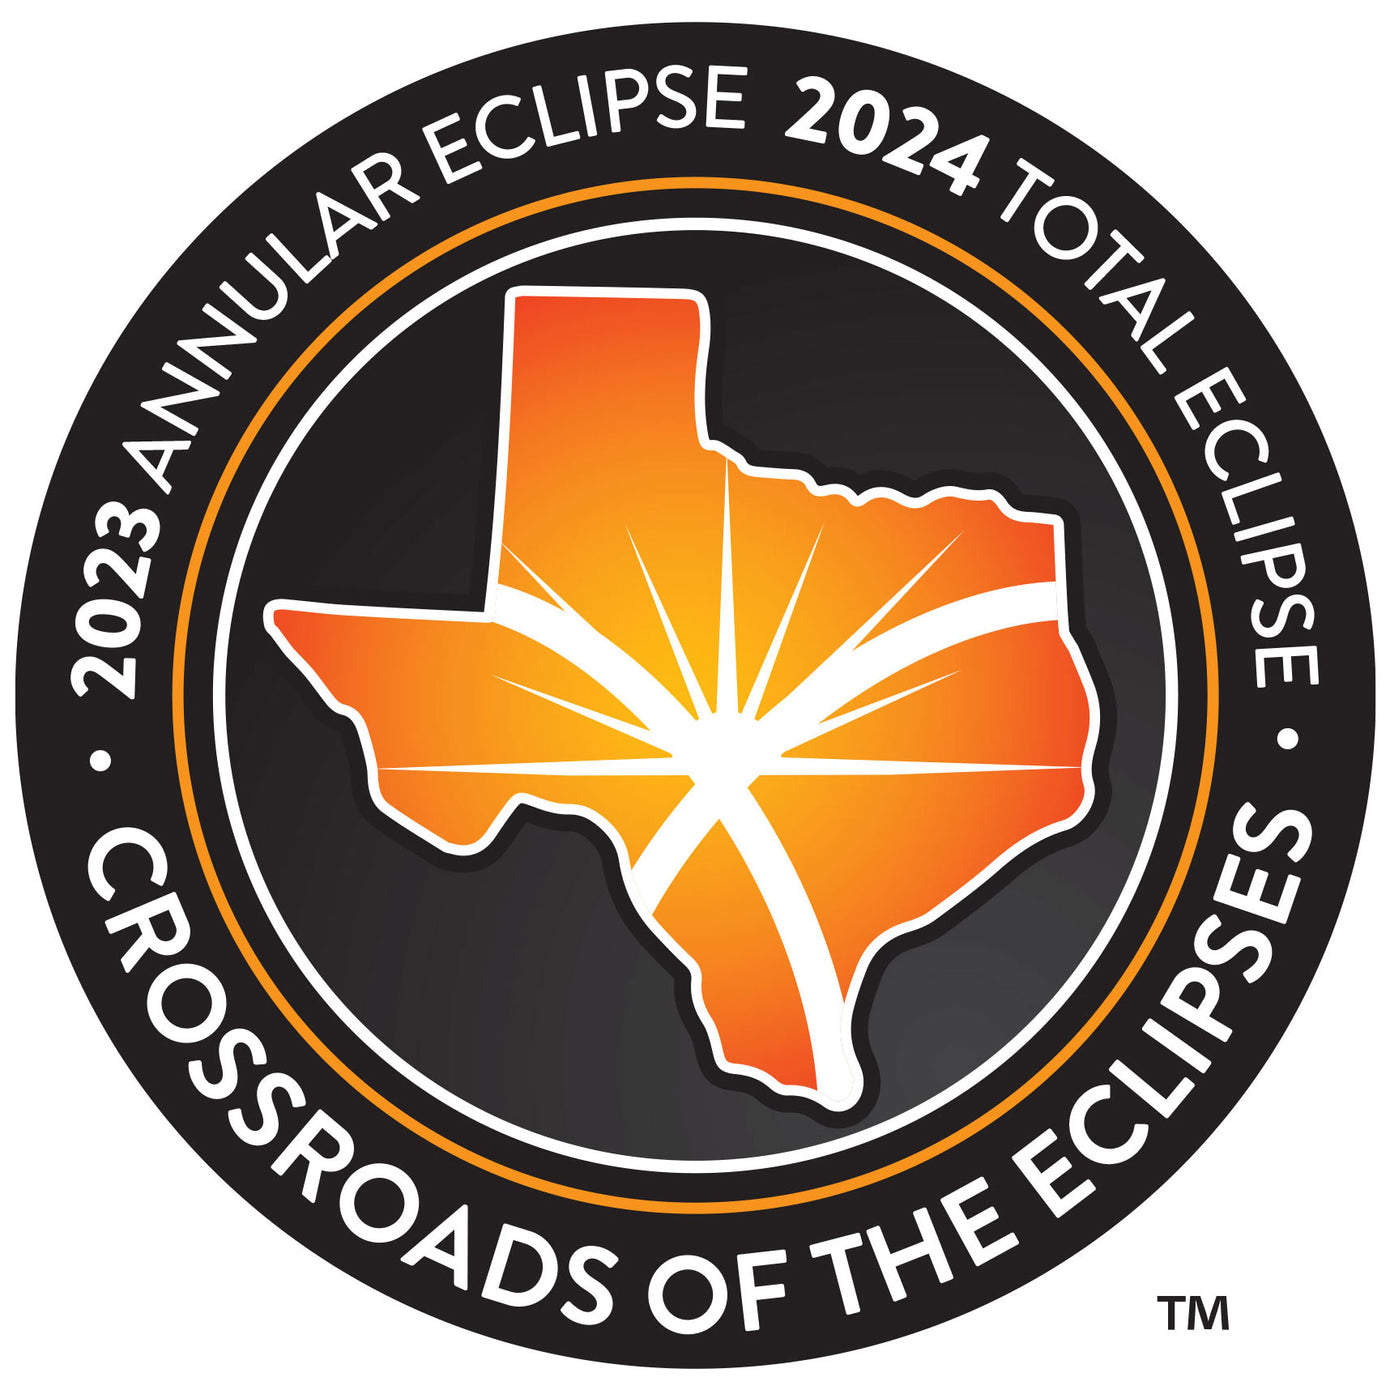 Crossroads of the Eclipses Expedition